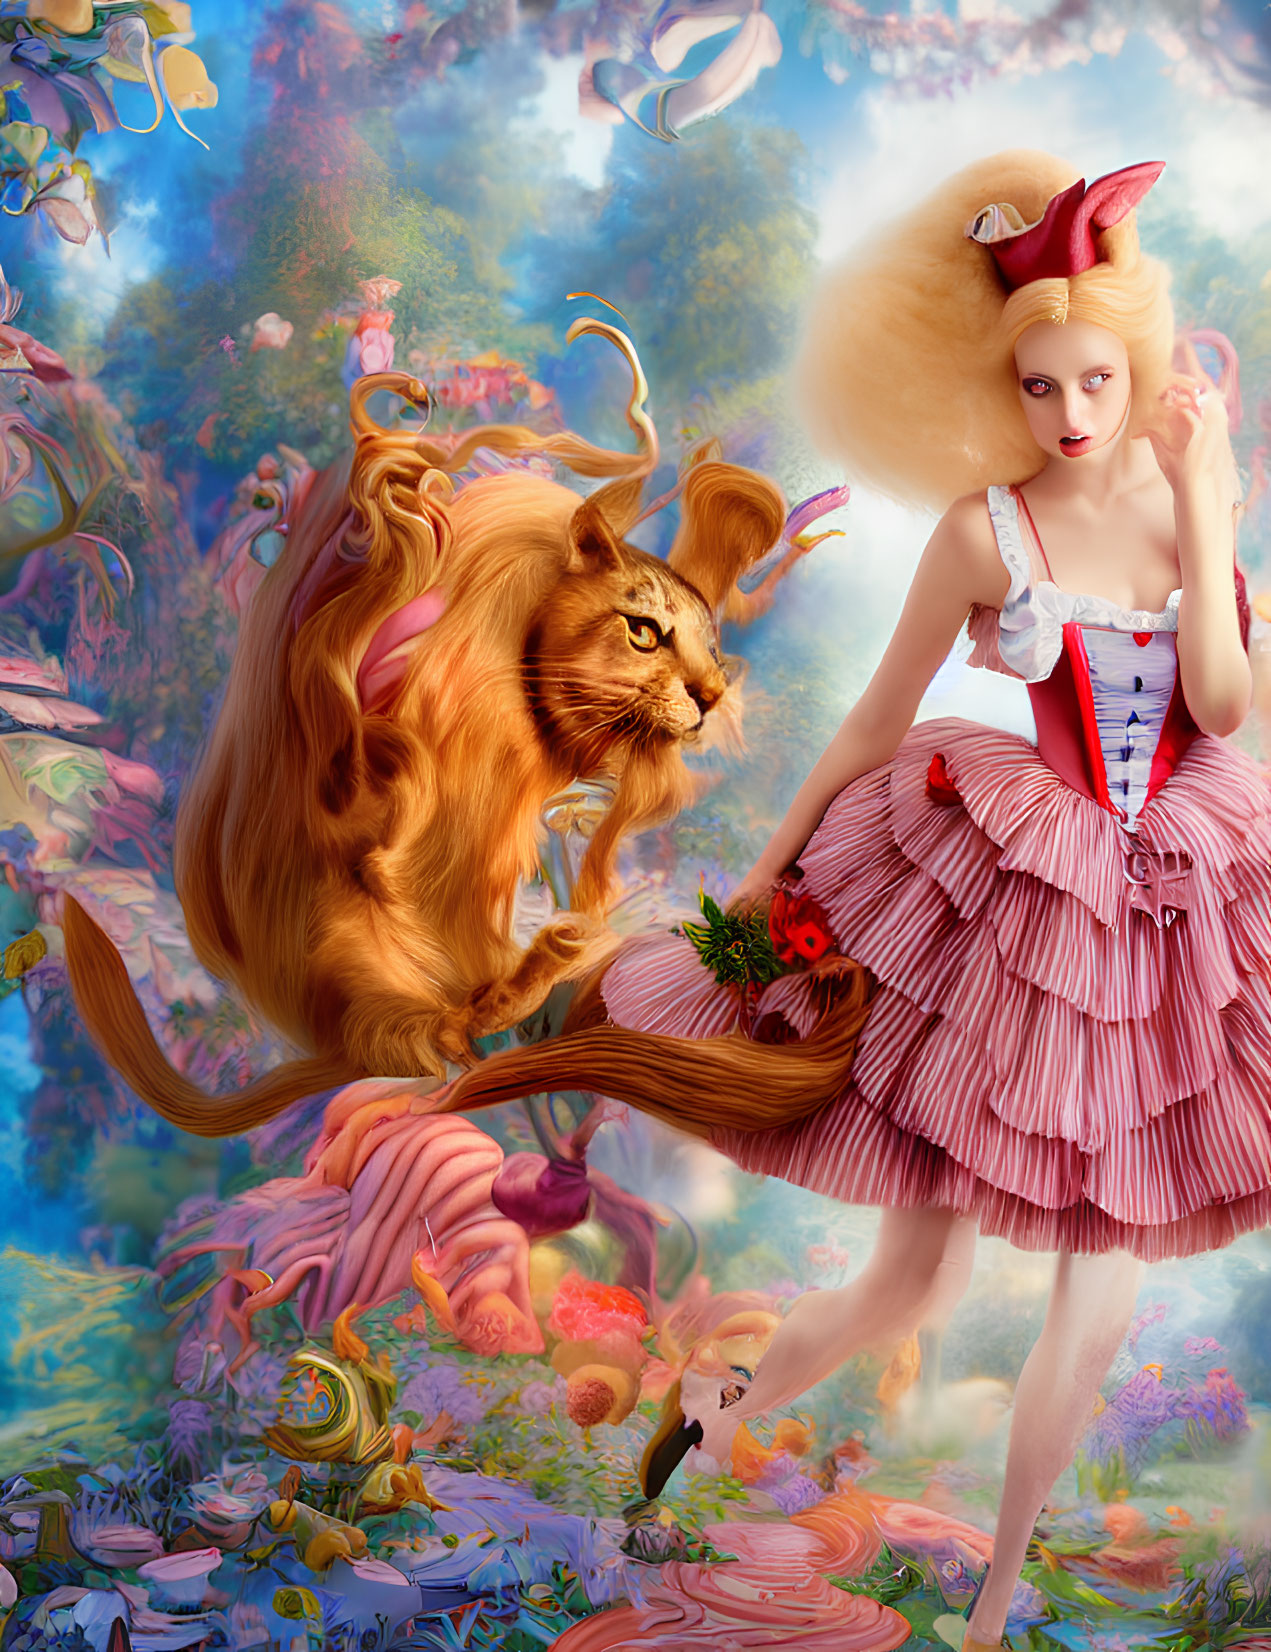 Fantastical scene: Woman in red and white dress with lion-like creature in dreamy backdrop